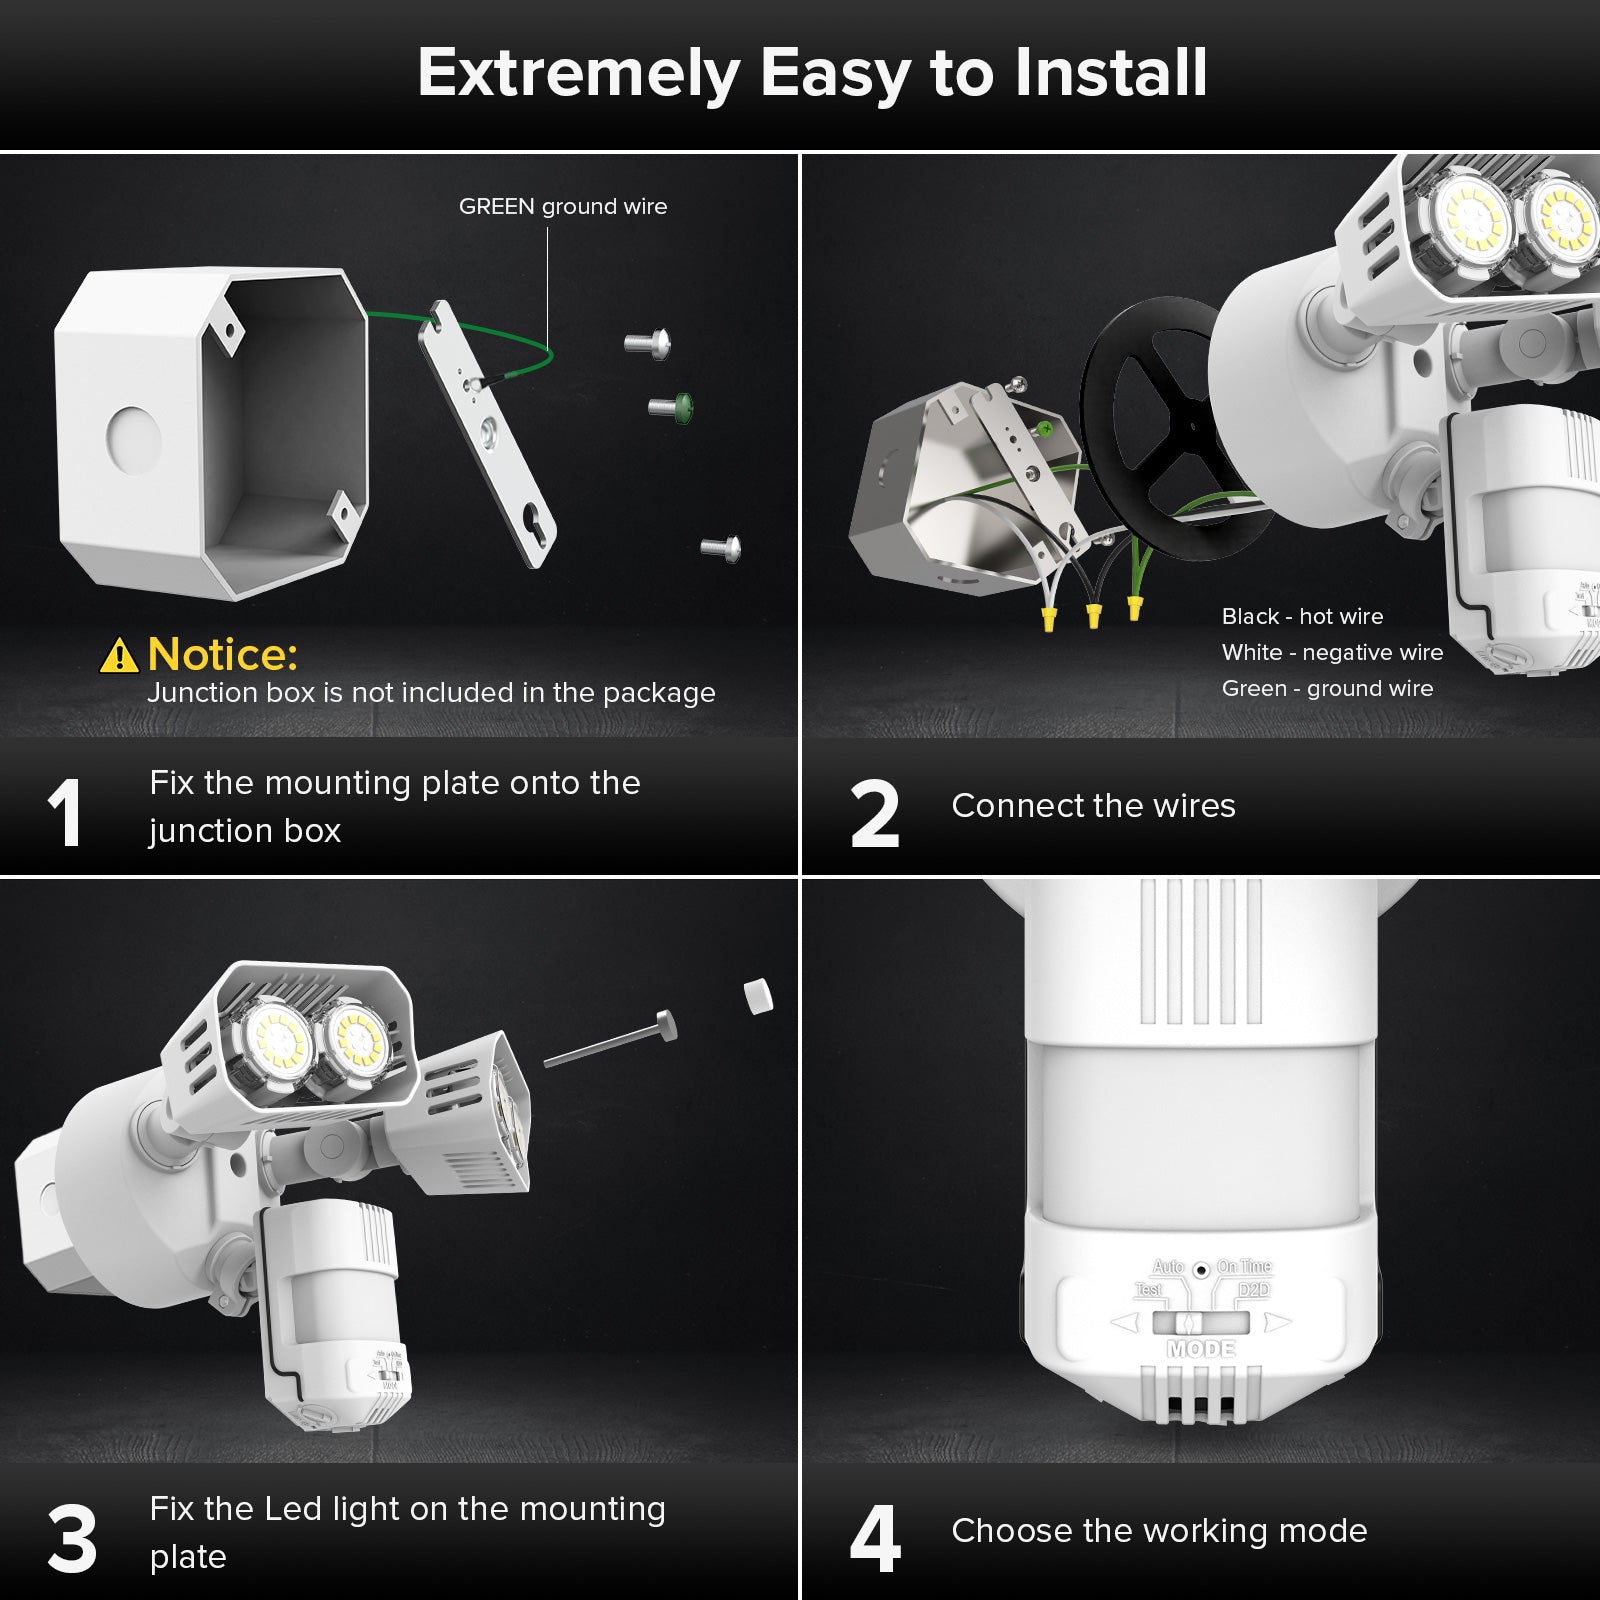 Upgraded 28W LED Security Light (Dusk to Dawn & Motion Sensor) is extremely easy to install